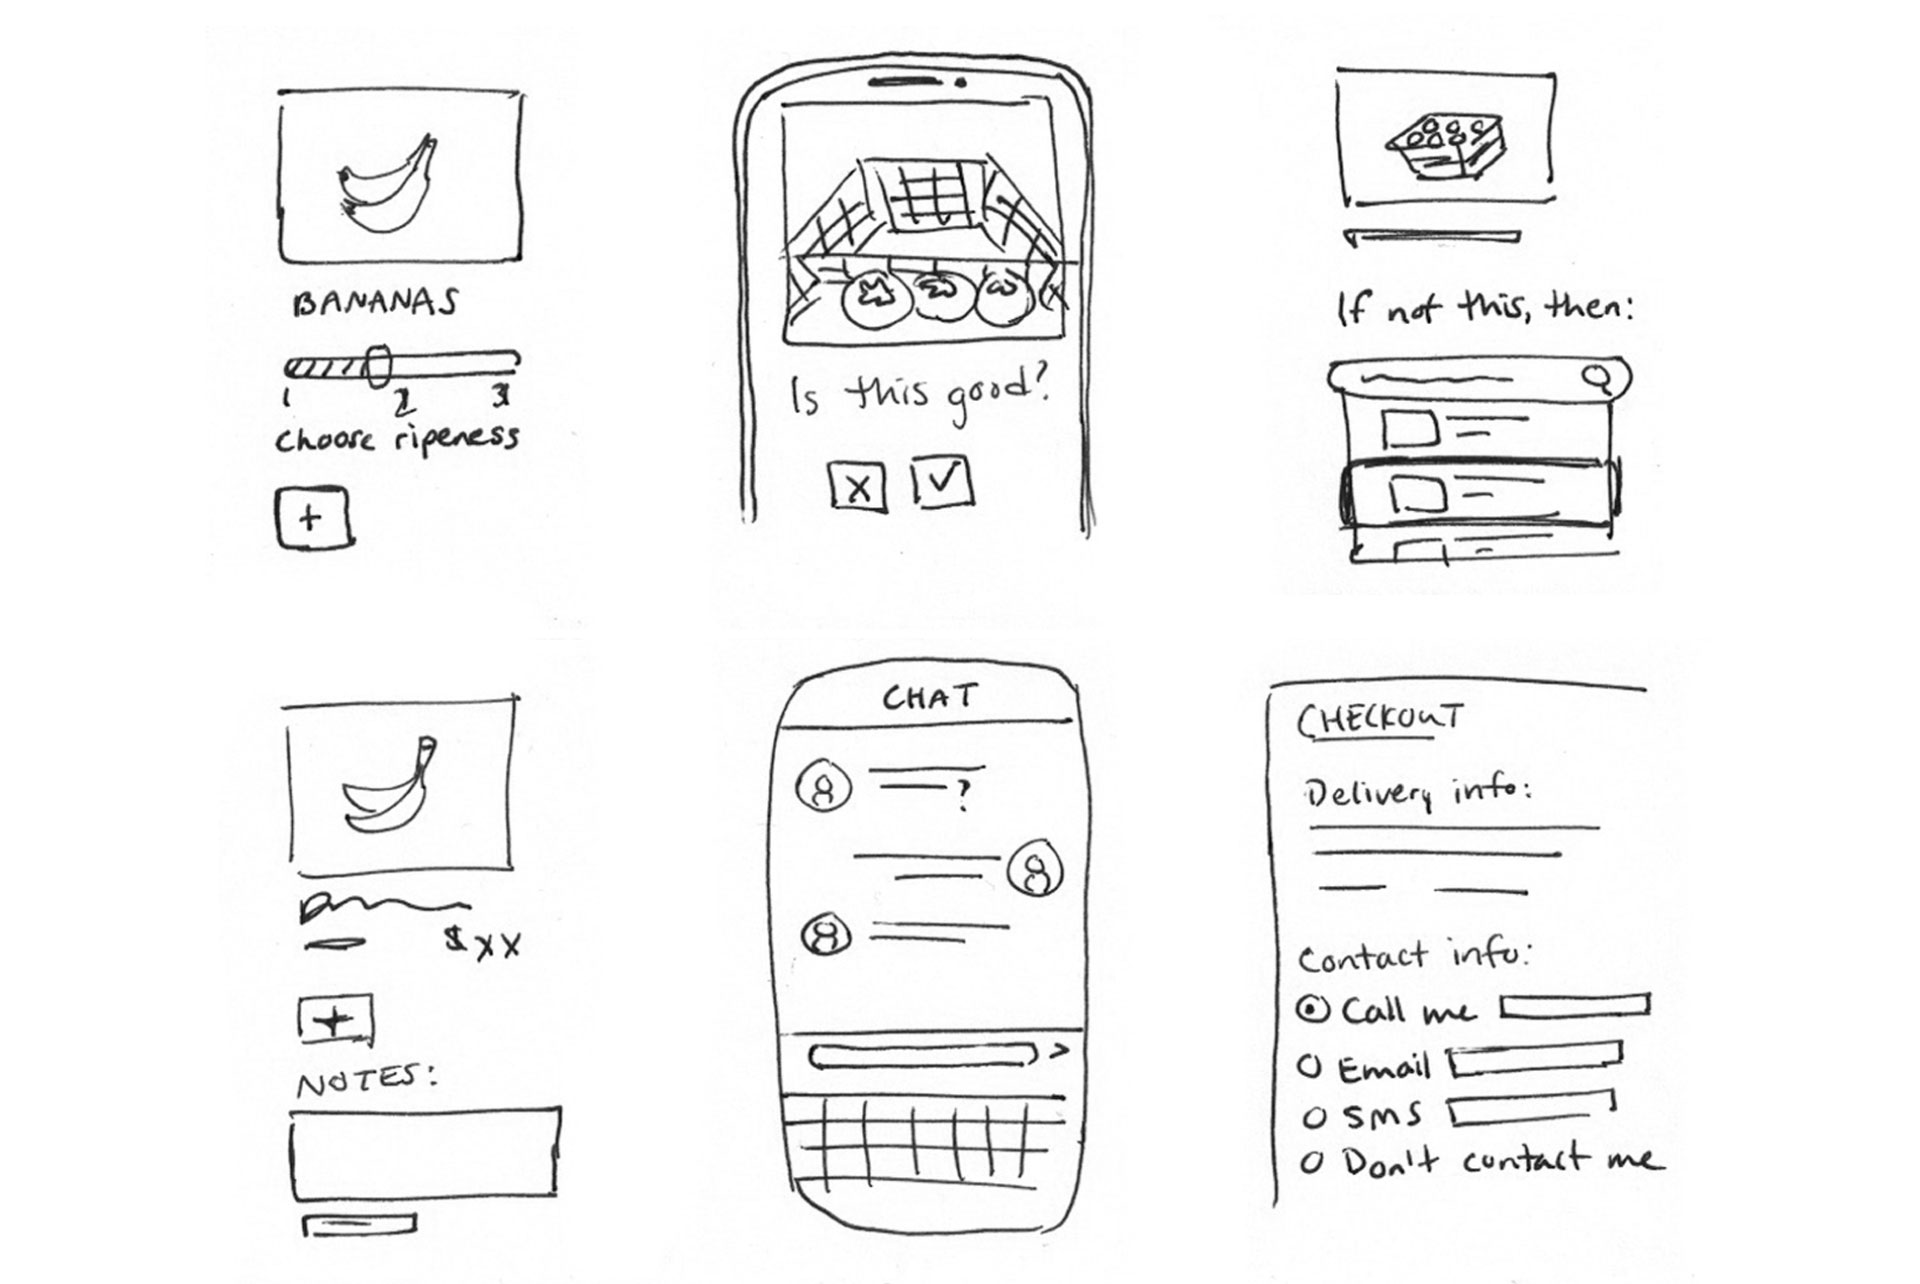 Six rough sketches with different ways of communicating item preferences when placing a grocery order